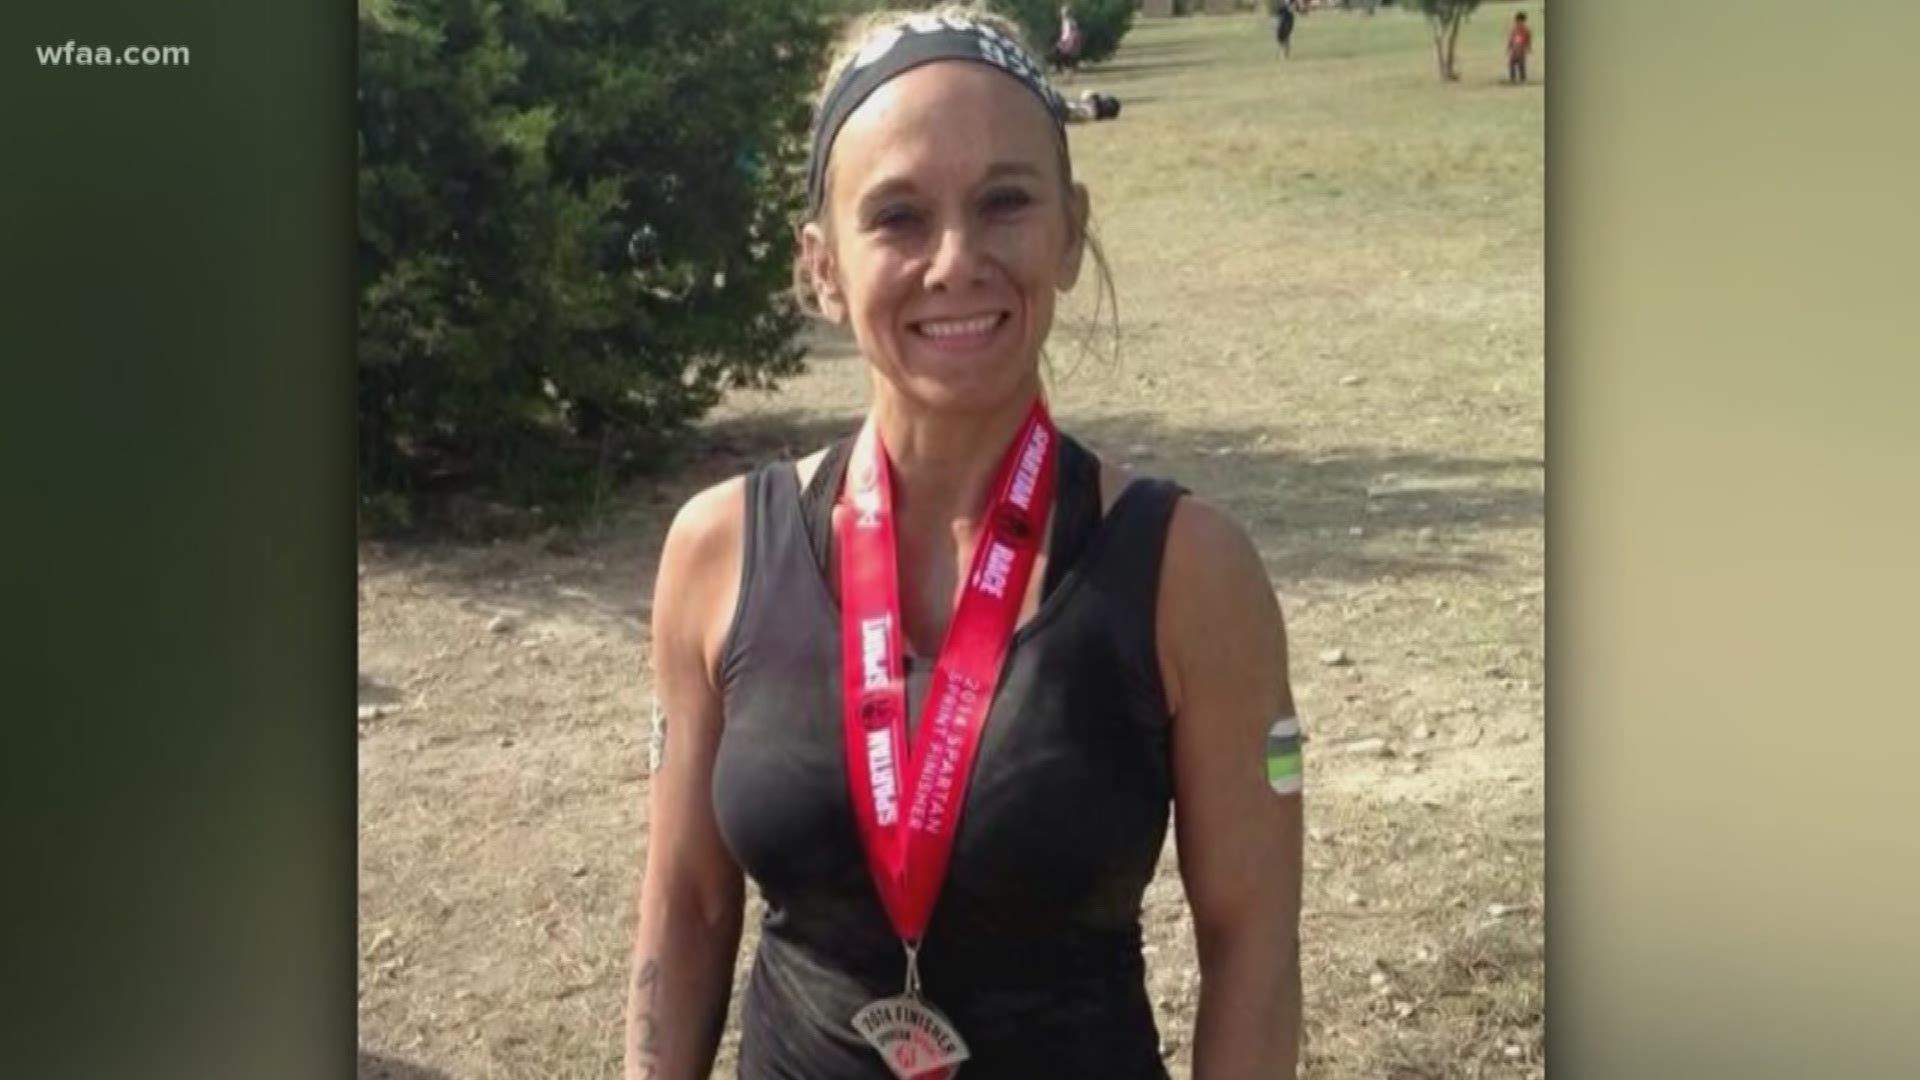 Missy Bevers, a mother from Midlothian in North Texas, was killed at a church on April 18, 2016. She was scheduled to lead a fitness class at the church that morning.